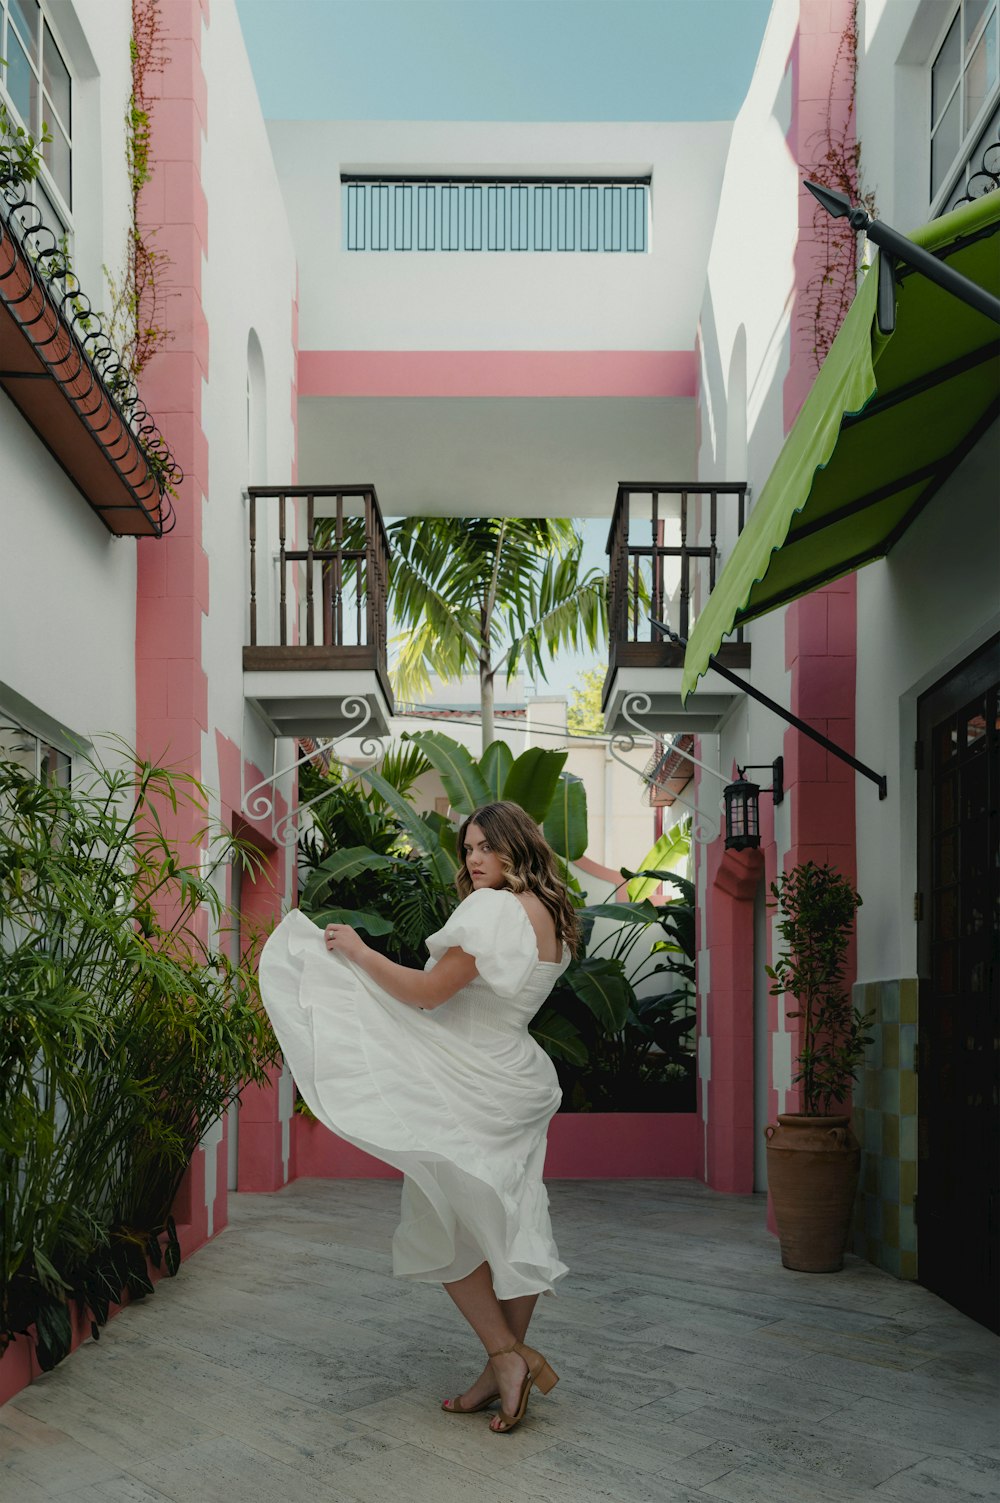 a woman in a white dress dancing in a courtyard